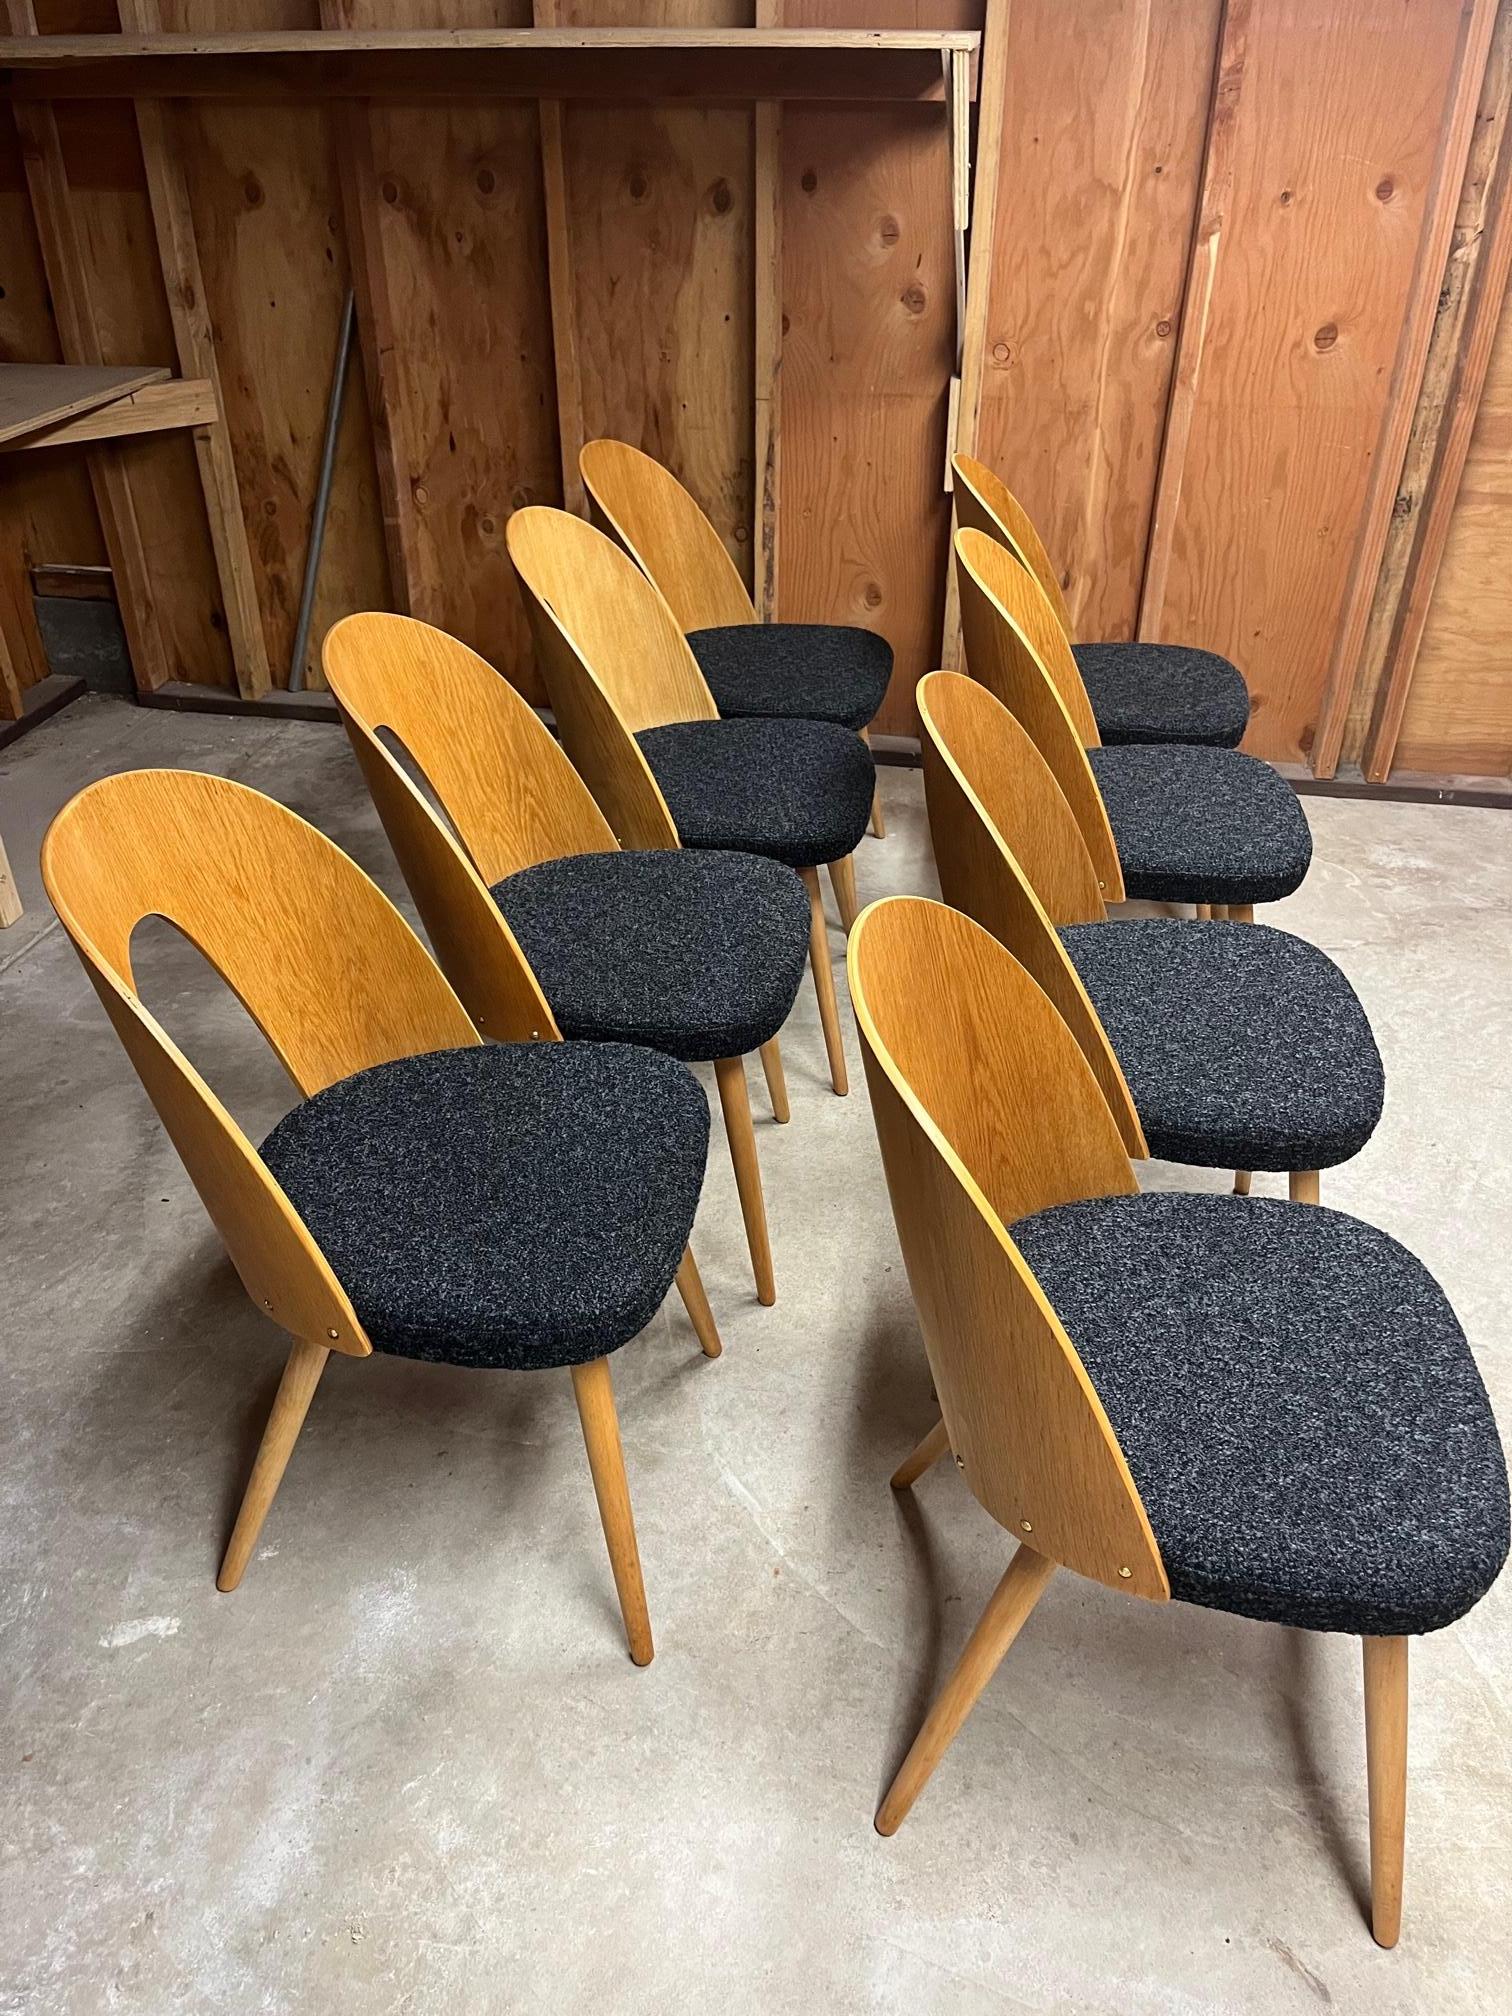 Set of 8 Chairs 
Designed by Antonin Suman in the 1960s for Tatra in Czechoslovakia. 
Ashwood with ash veneer, upholstered seat. 
Brand new Reupholstery with New KVADRAT BLACK Boucle

Dimensions:
30